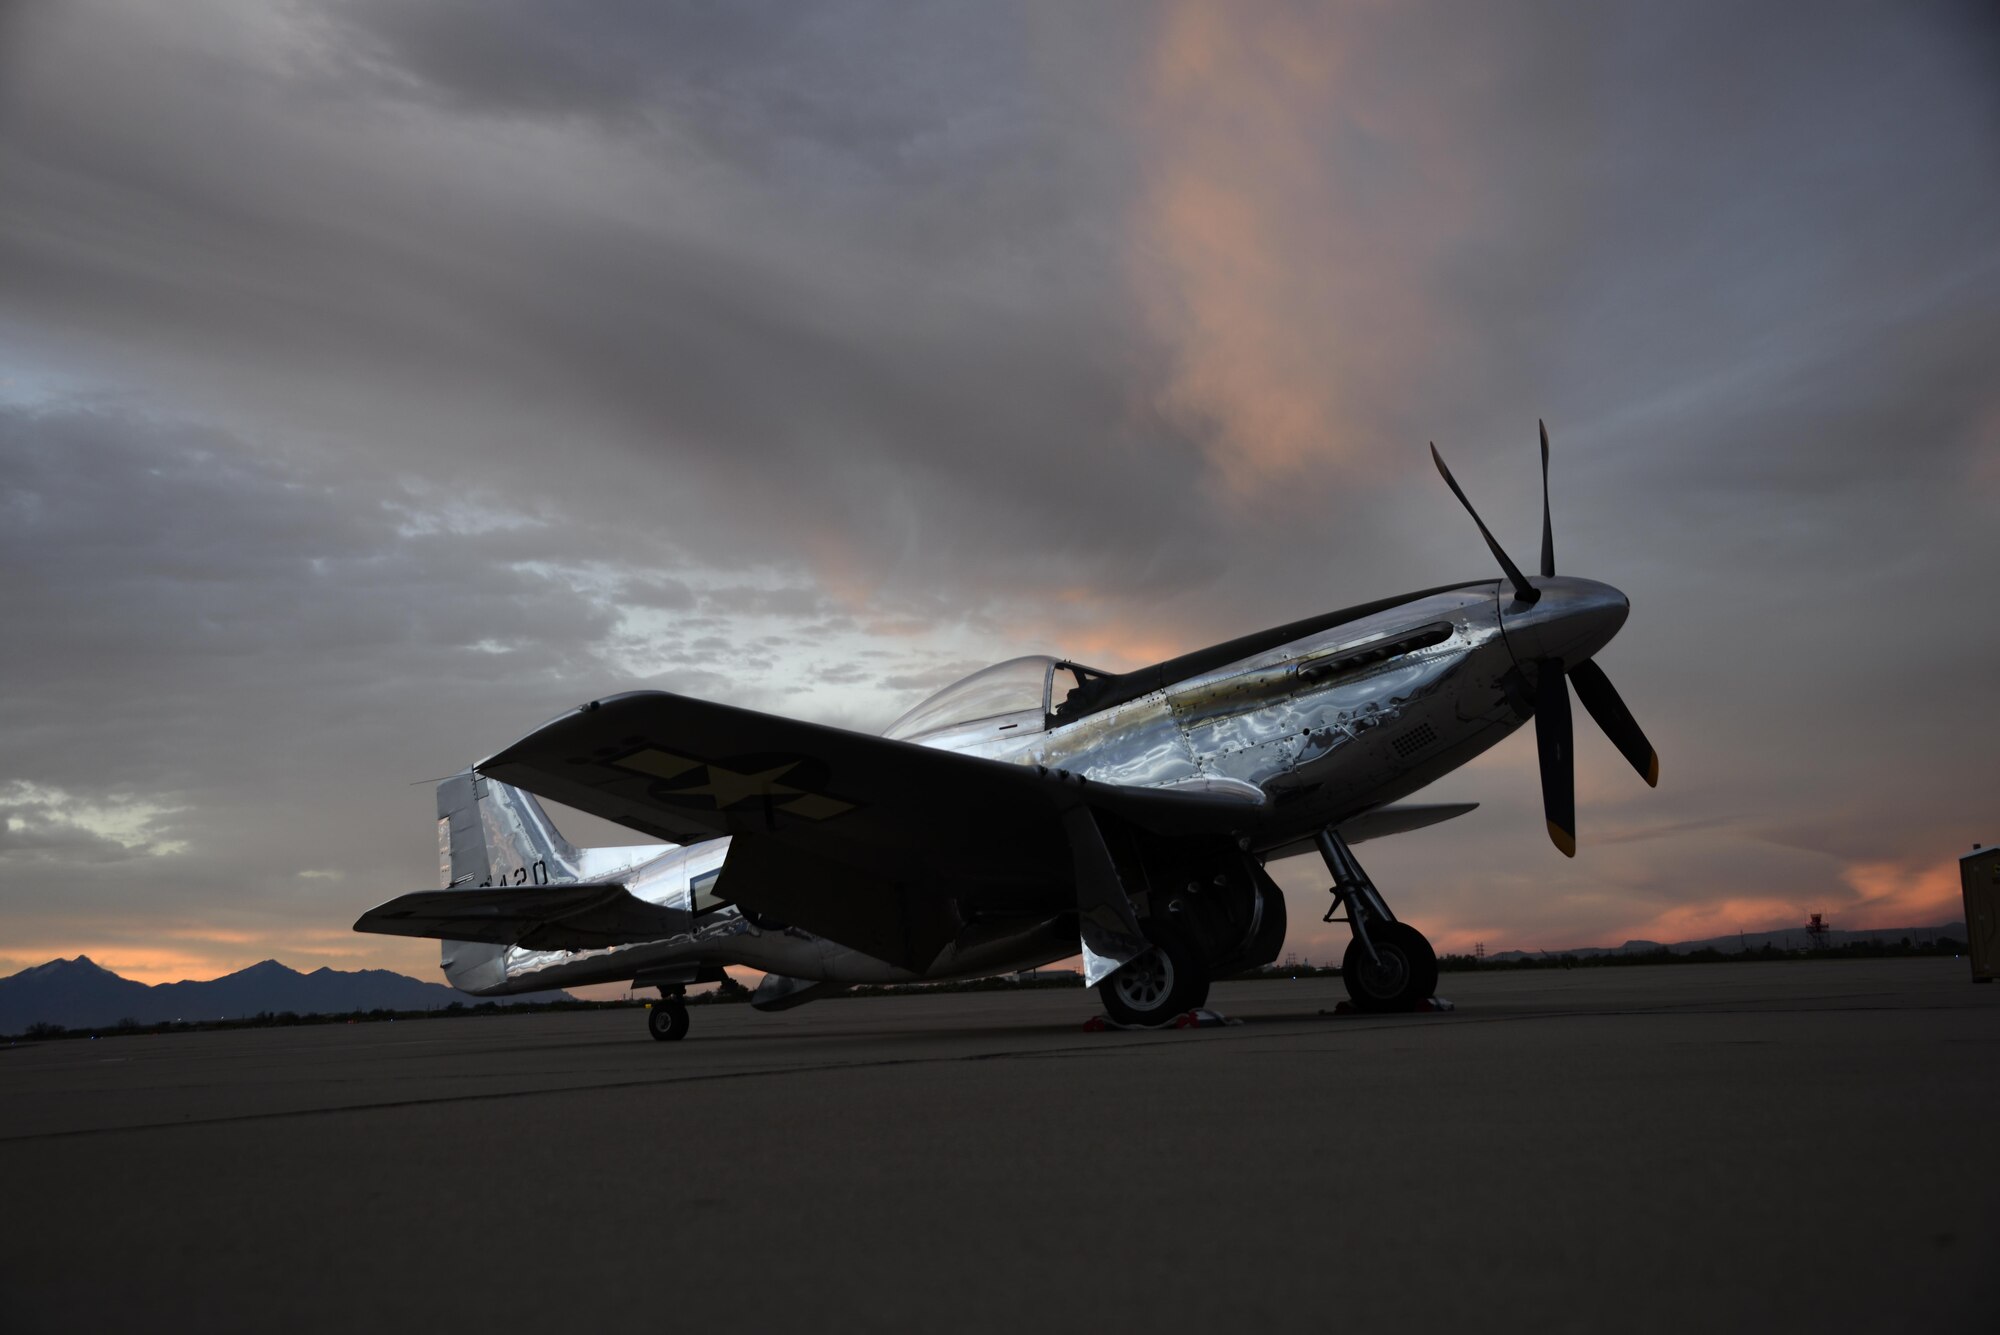 A P-51 Mustang sits on the flight line during the 2017 Heritage Flight Training and Certification Course at Davis-Monthan Air Force Base, Ariz., Feb. 12, 2017. The annual aerial demonstration training event has been held at D-M since 2001. The modern aircraft that participated in this year’s HFTCC were the F-35 Lightning II, the F-22 Raptor, F-16 Fighting Falcon and the A-10C Thunderbolt II. The historic aircraft included the P-51 and T-51 Mustangs, the P-40 Warhawk, the P-38 Lightning, the P-47 Thunderbolt, the T-33 Shooting Star and the F-86 Sabre. (U.S. Air Force photo by Senior Airman Betty R. Chevalier)